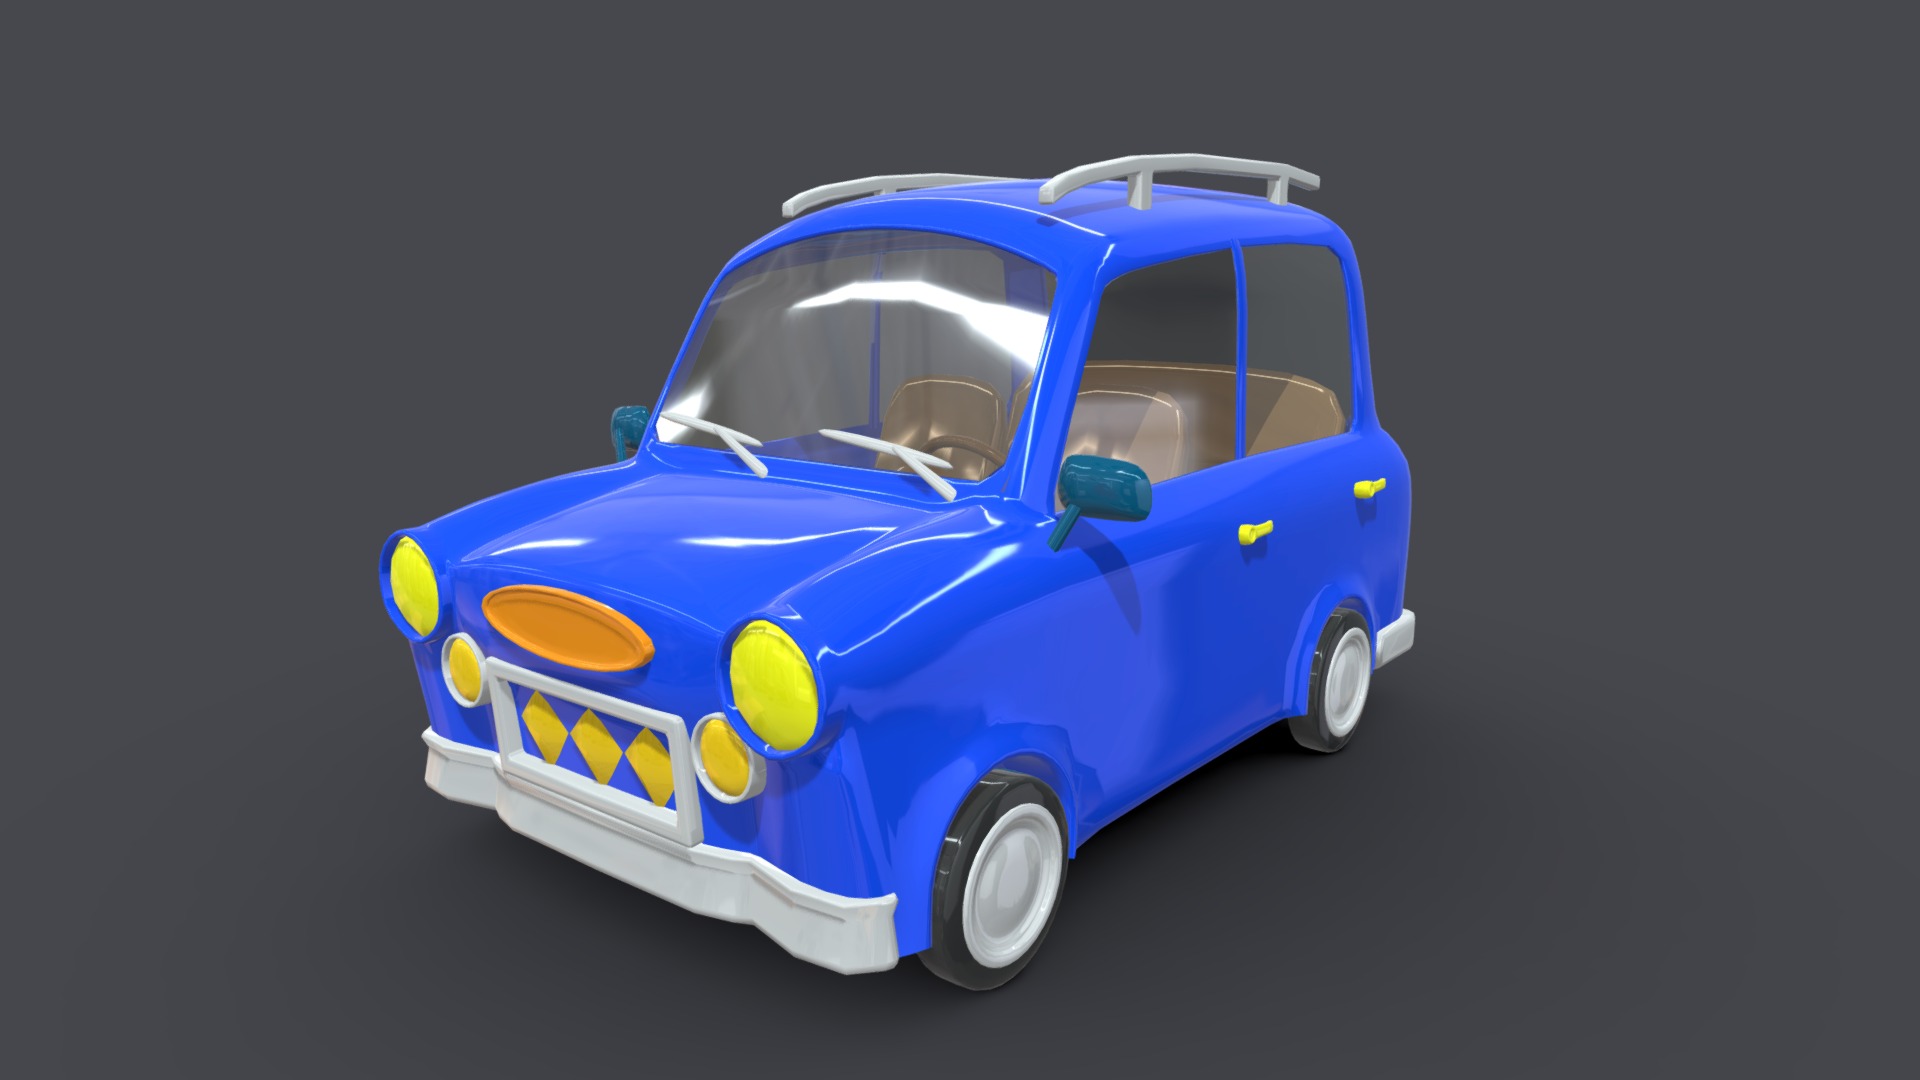 3D model Asset – Cartoons – Car – 02 – 3D Model - This is a 3D model of the Asset - Cartoons - Car - 02 - 3D Model. The 3D model is about a blue and white toy car.